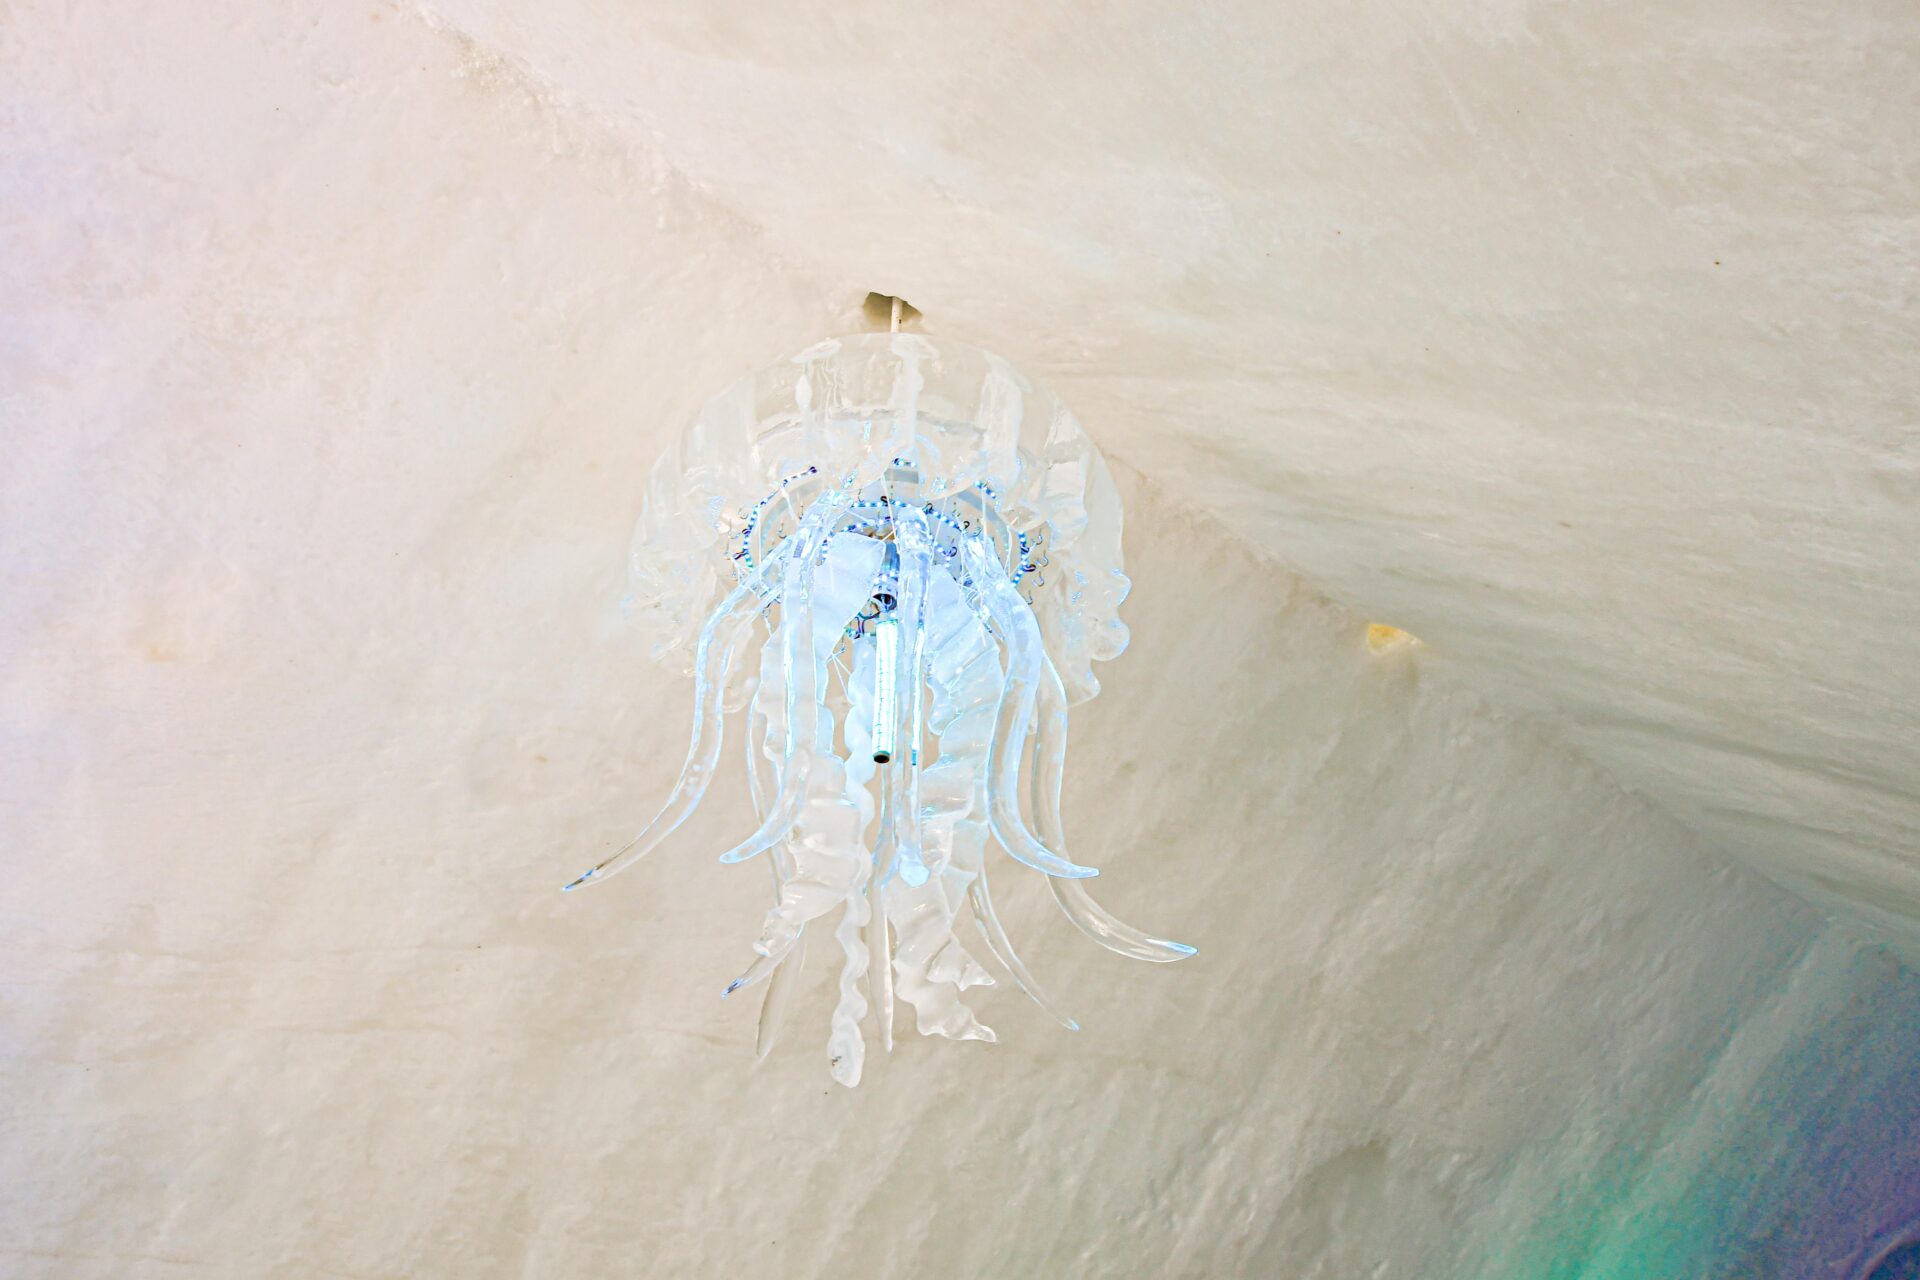 jellyfish chandelier made of ice